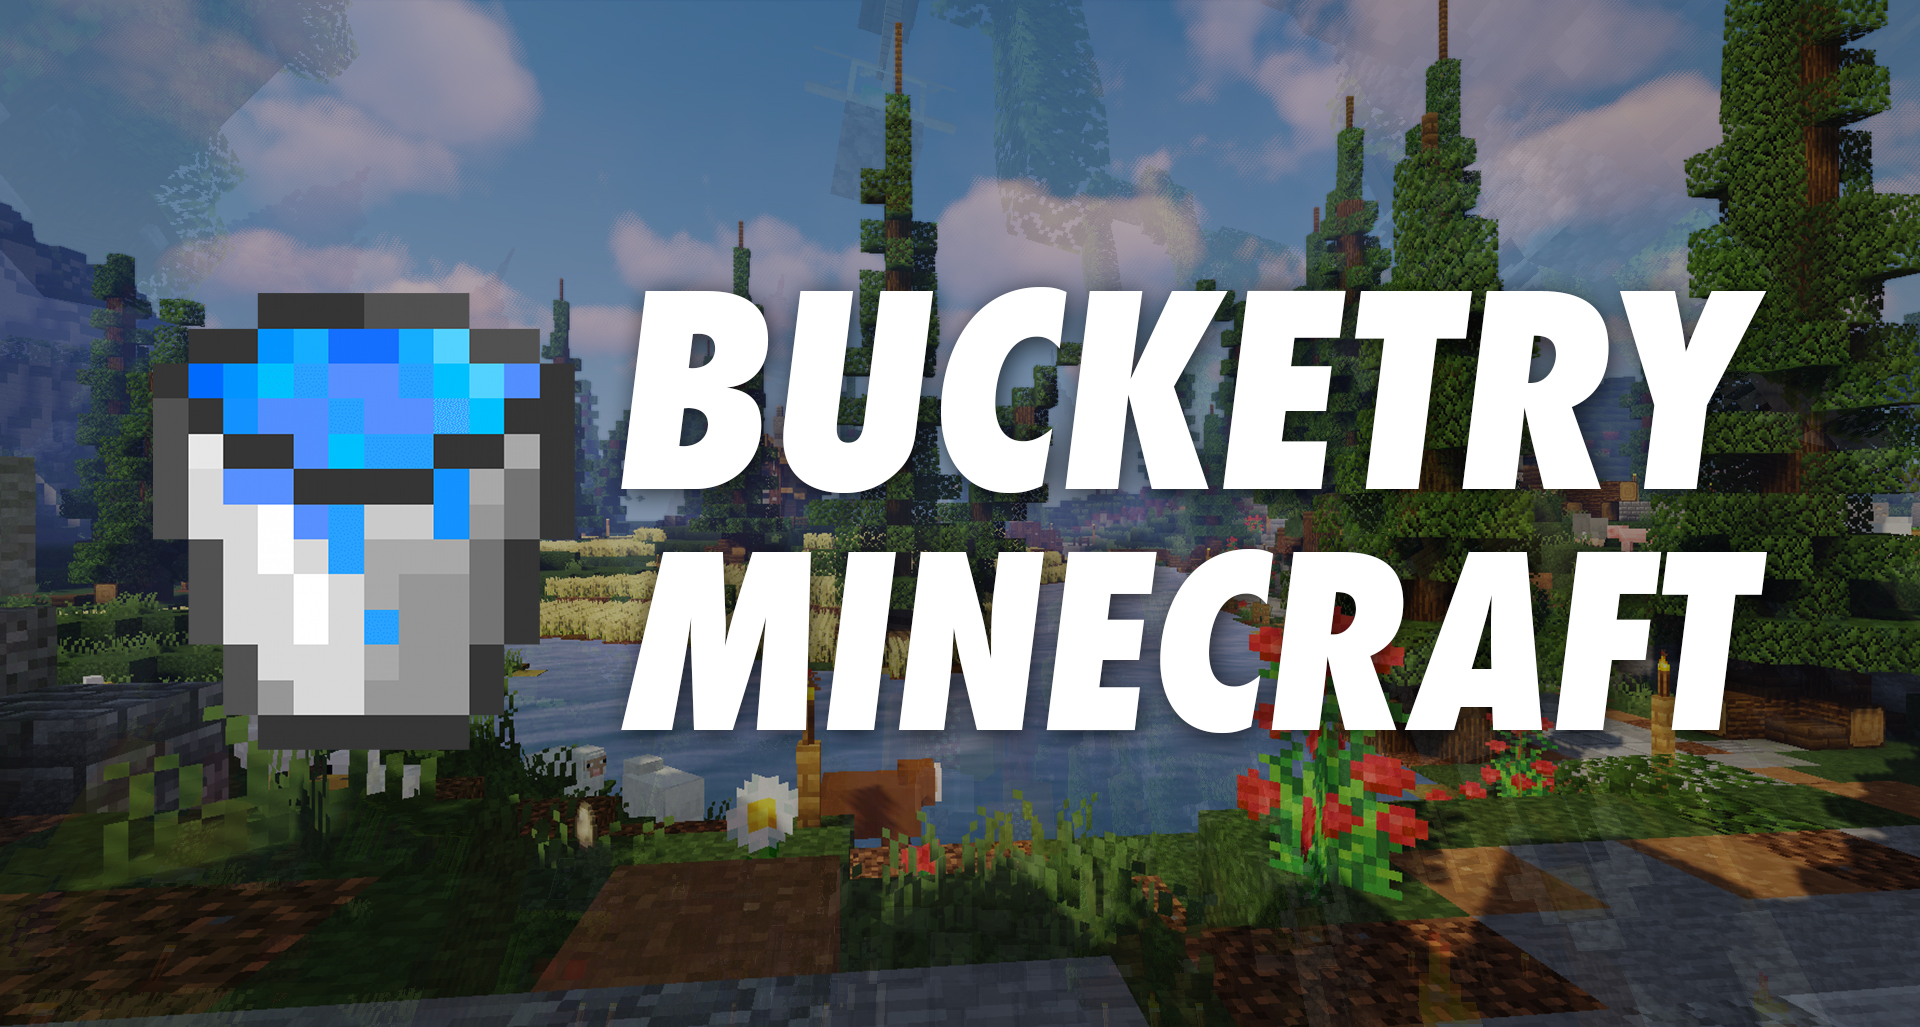 Bucketry Minecraft ⭐ Enhanced Survival Like No Other ⭐ Land Claiming ⭐ Over 100 Custom Enchants ⭐ MMO Type Levels ⭐ Non P2W ⭐ Crates ⭐ Rank Progression ⭐ Shops ⭐ AND MUCH MORE!! Minecraft Server